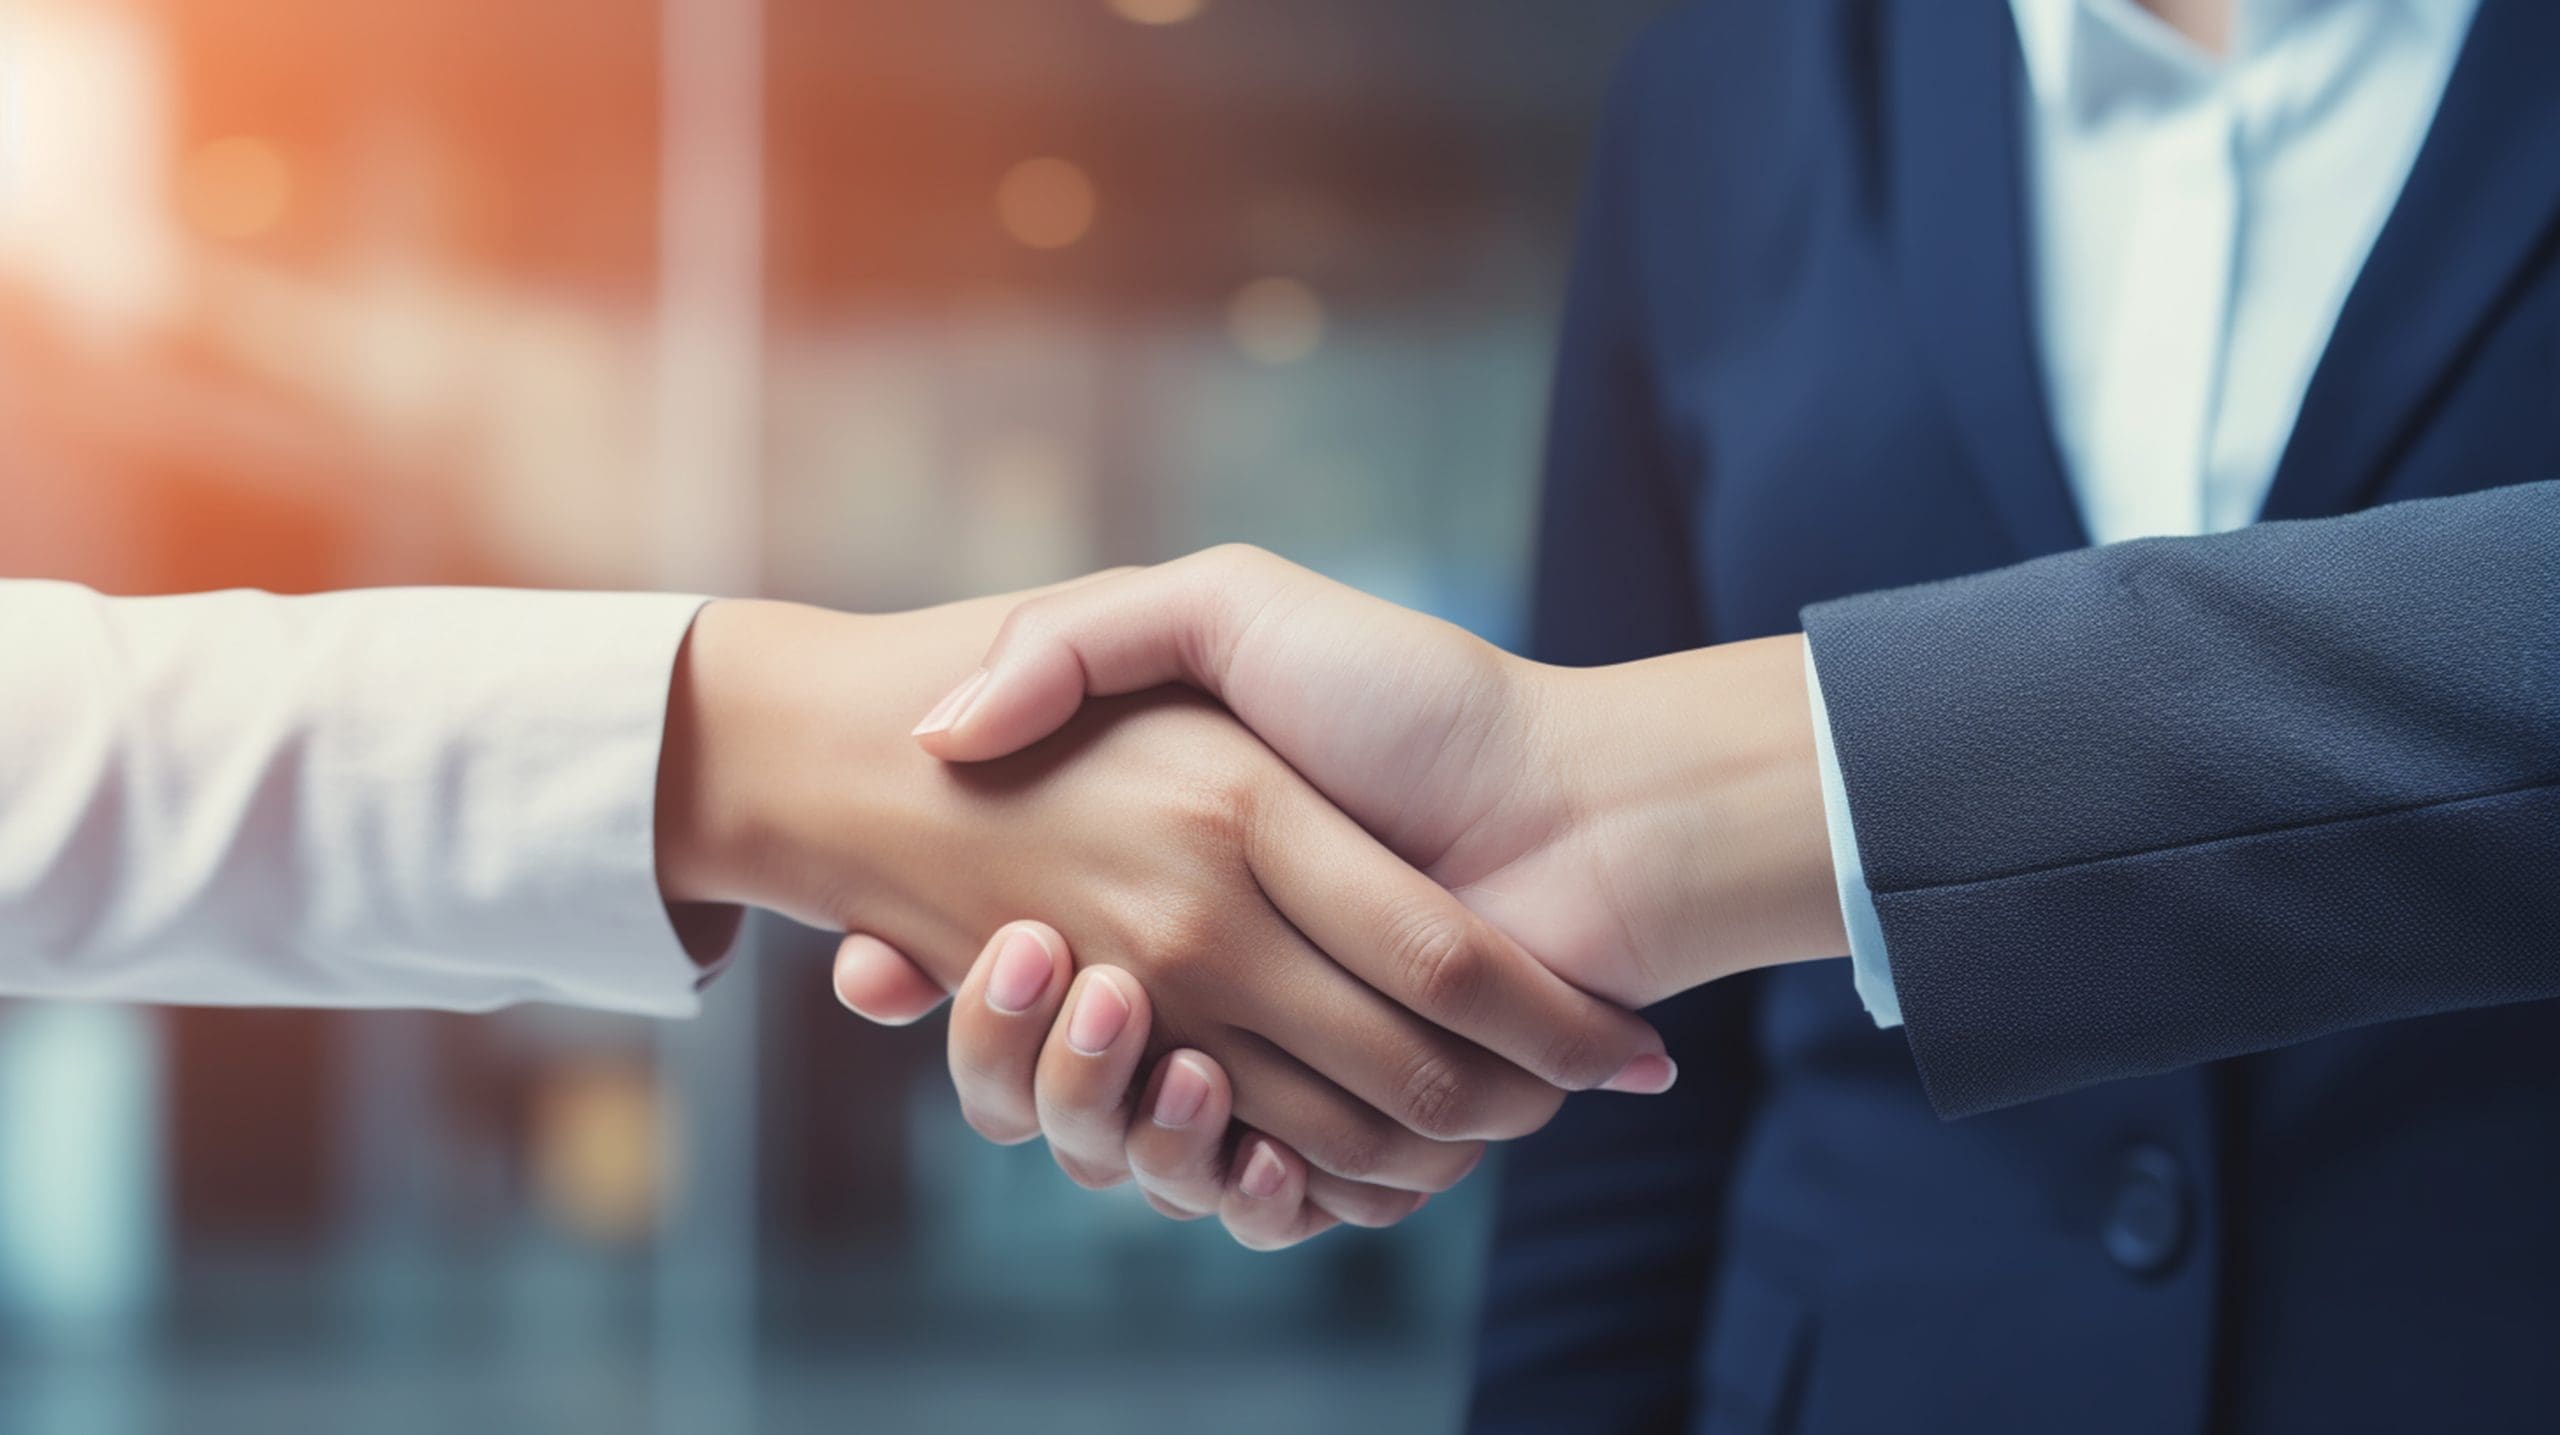 Two business people shaking hands in front of an office.